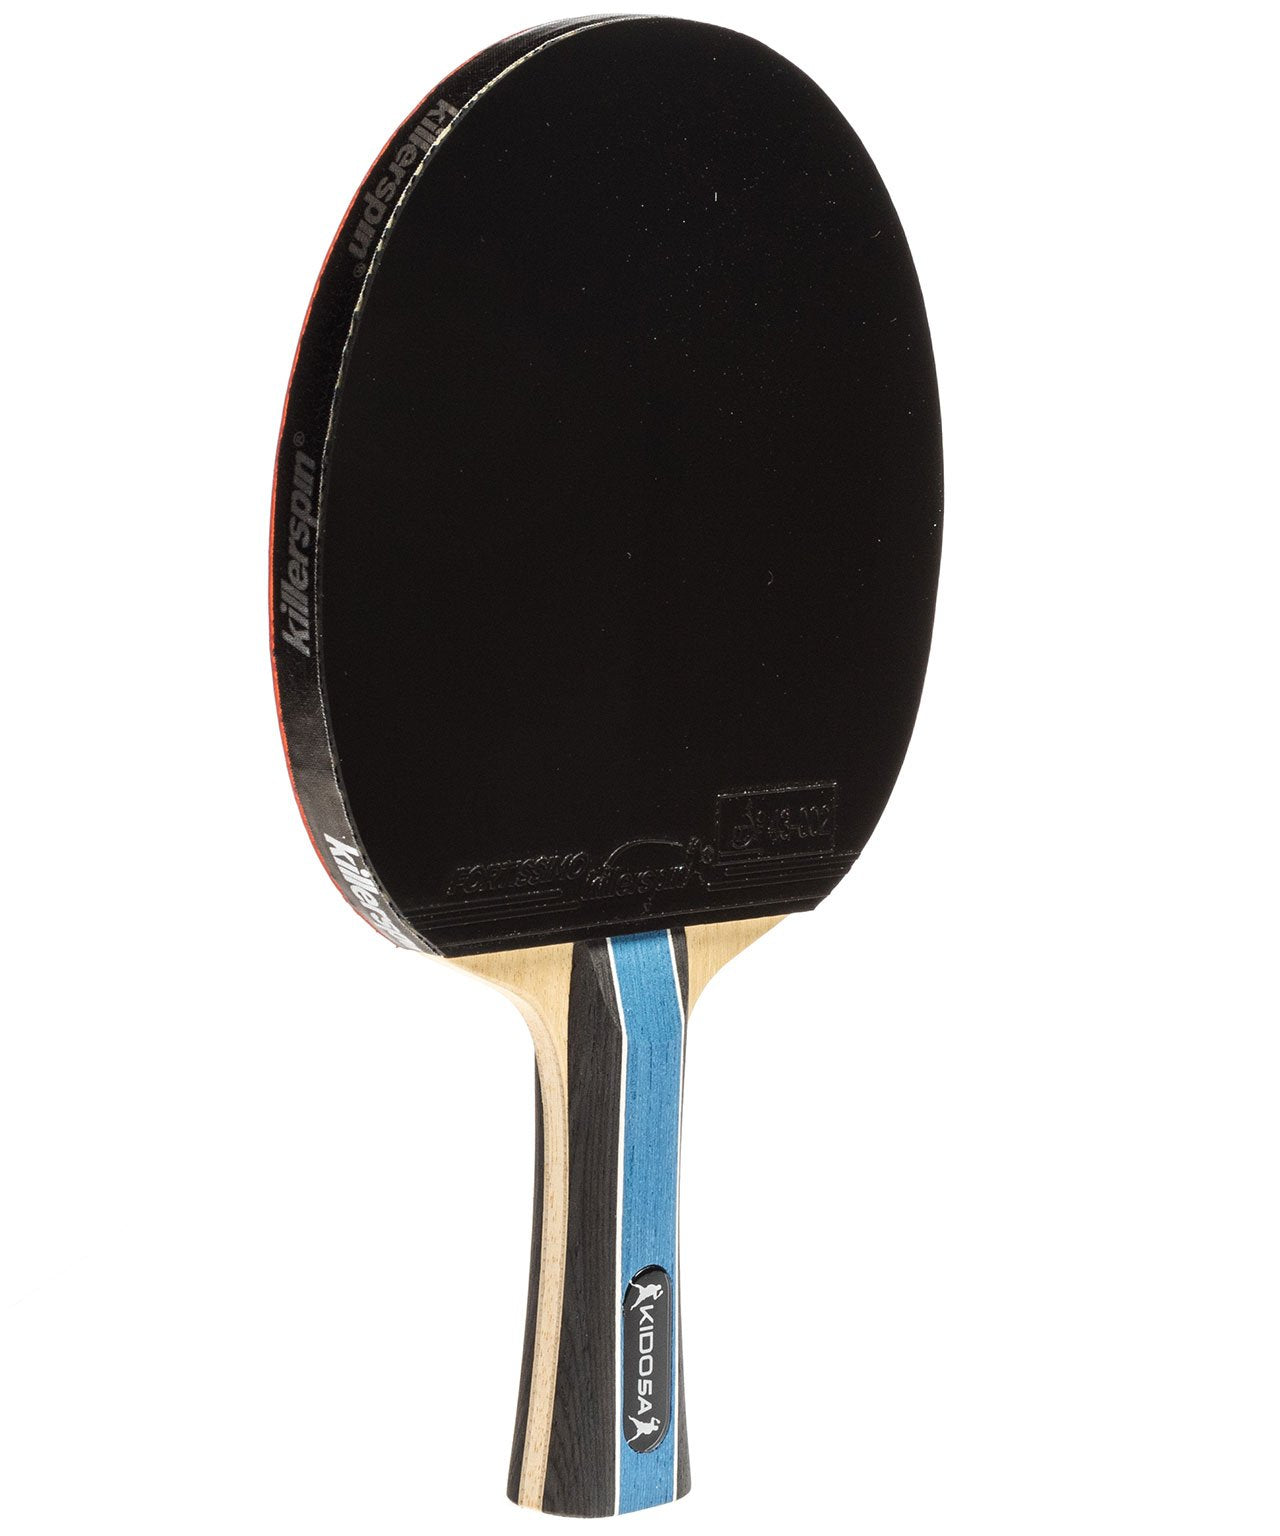 Killerspin Ping Pong Paddle Kido 5A RTG Premium - Flared Black Fortissimo Rubber